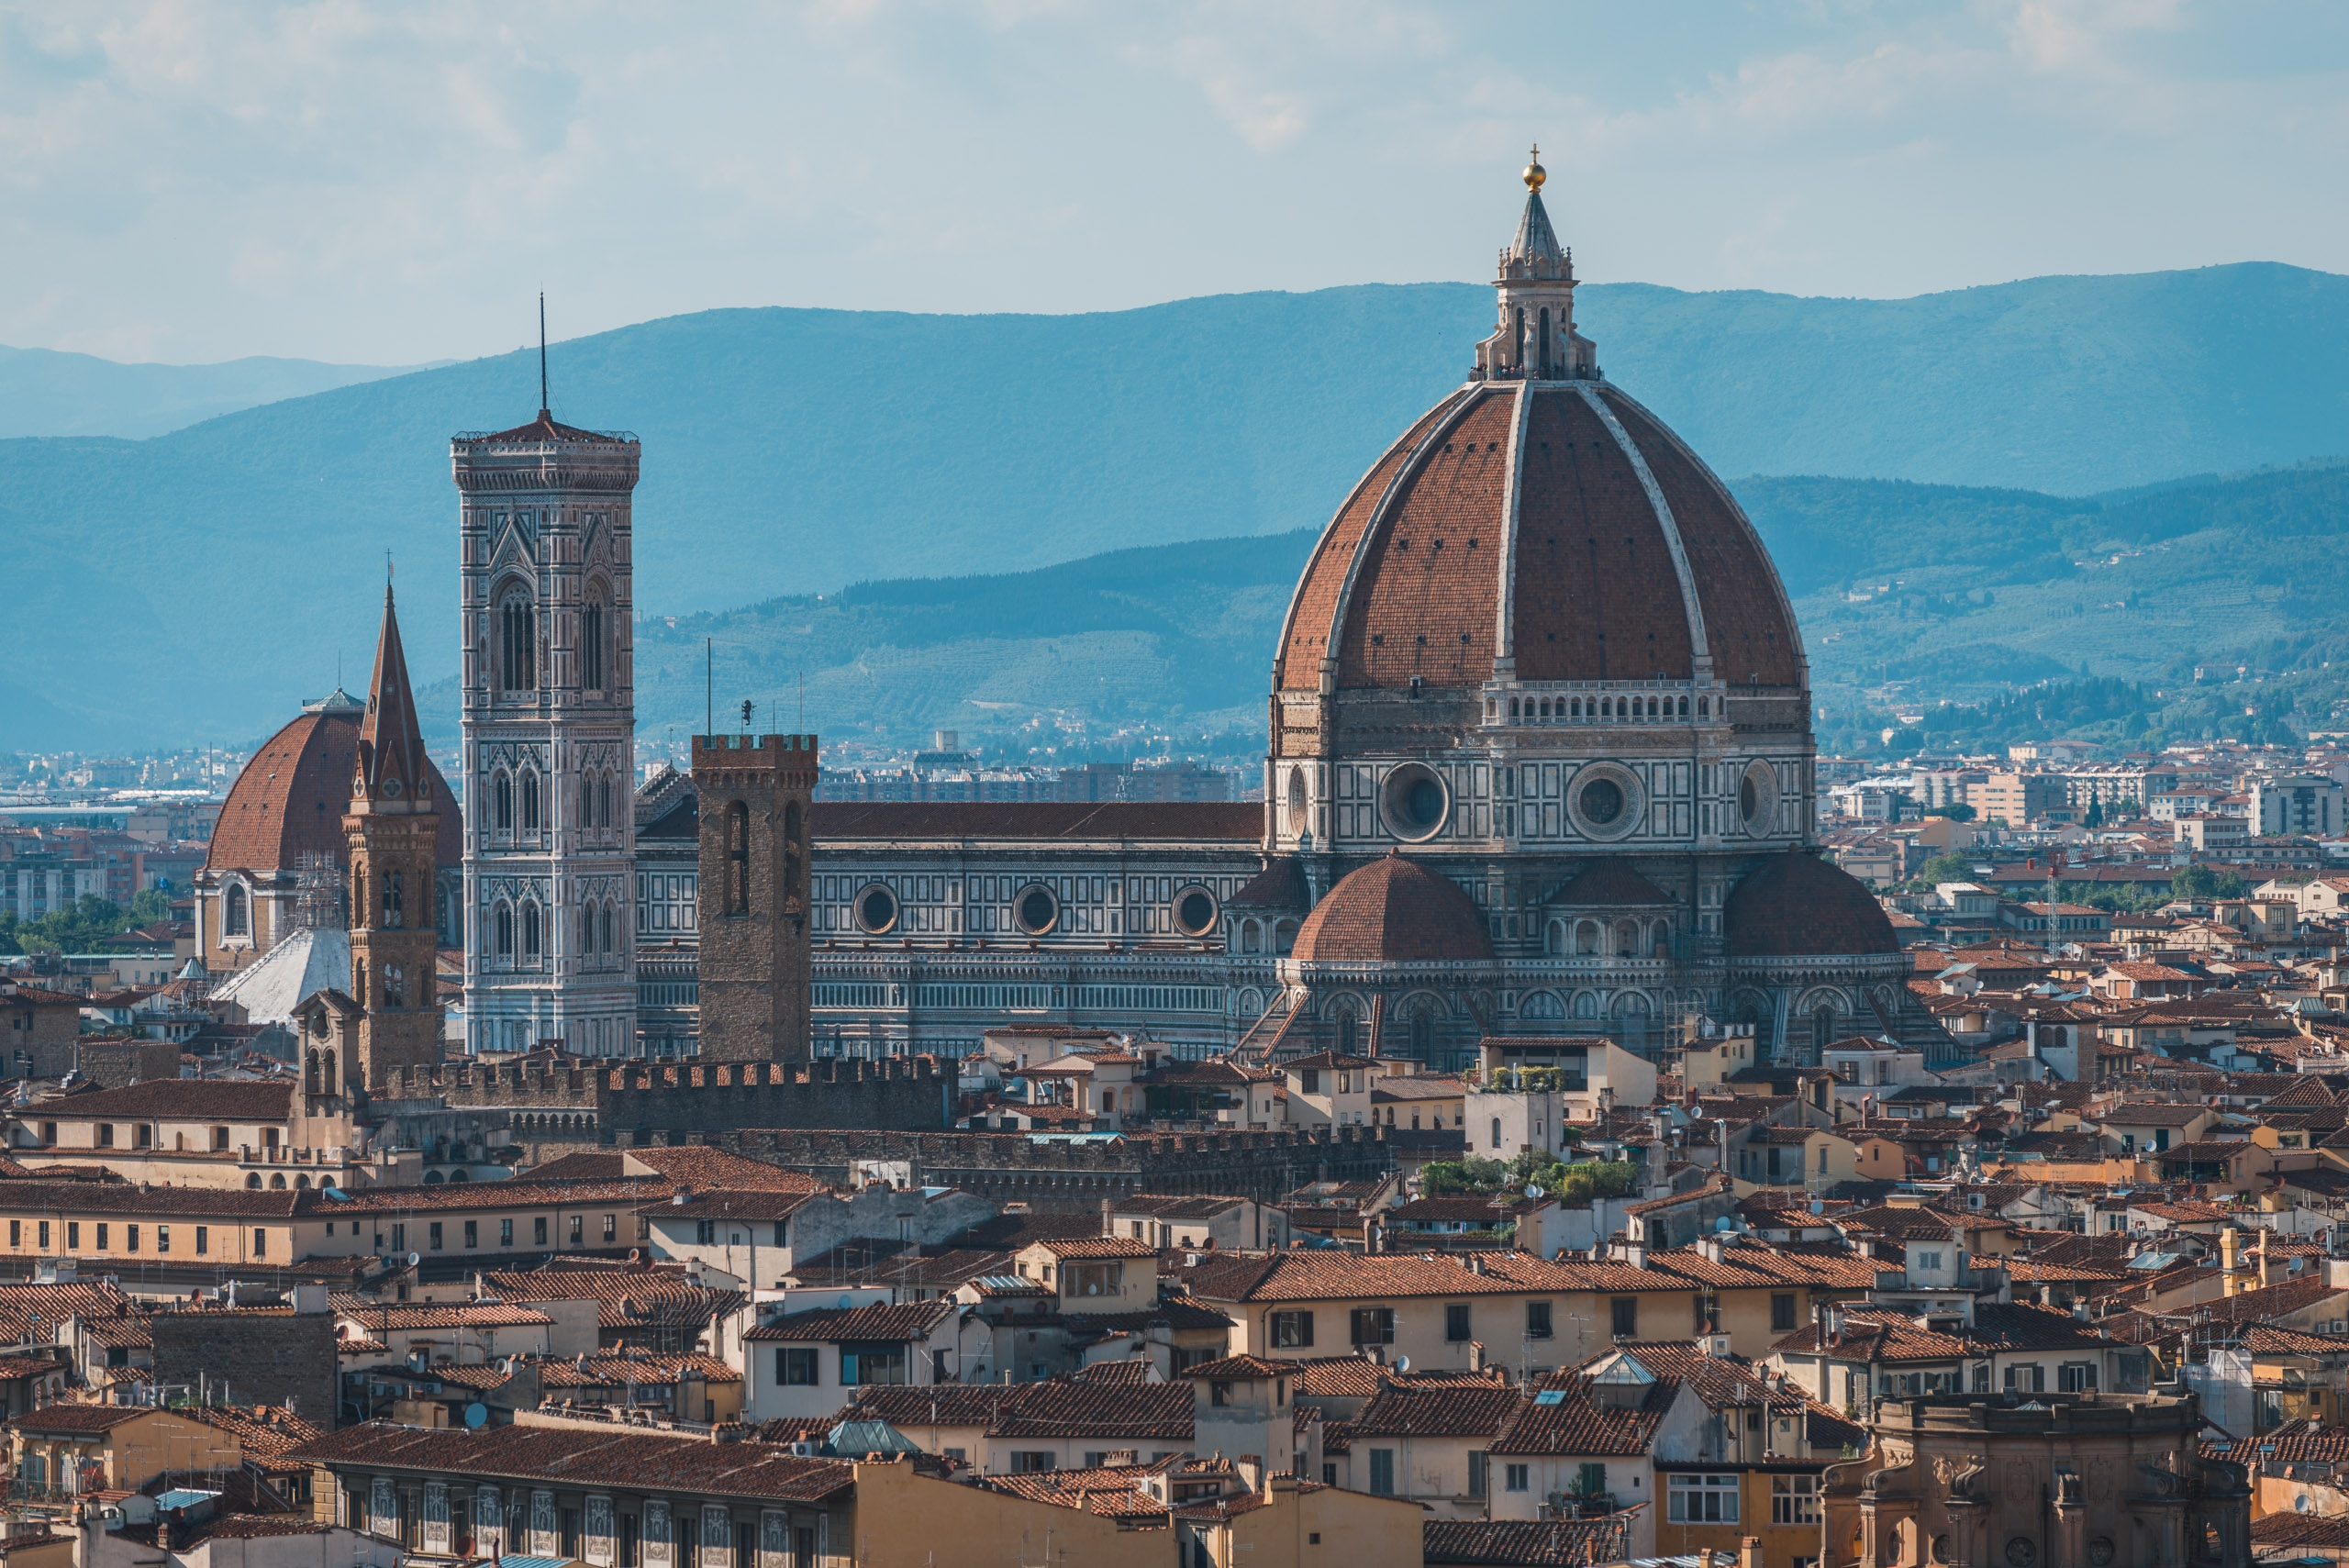 The Dome of the Florence Cathedral